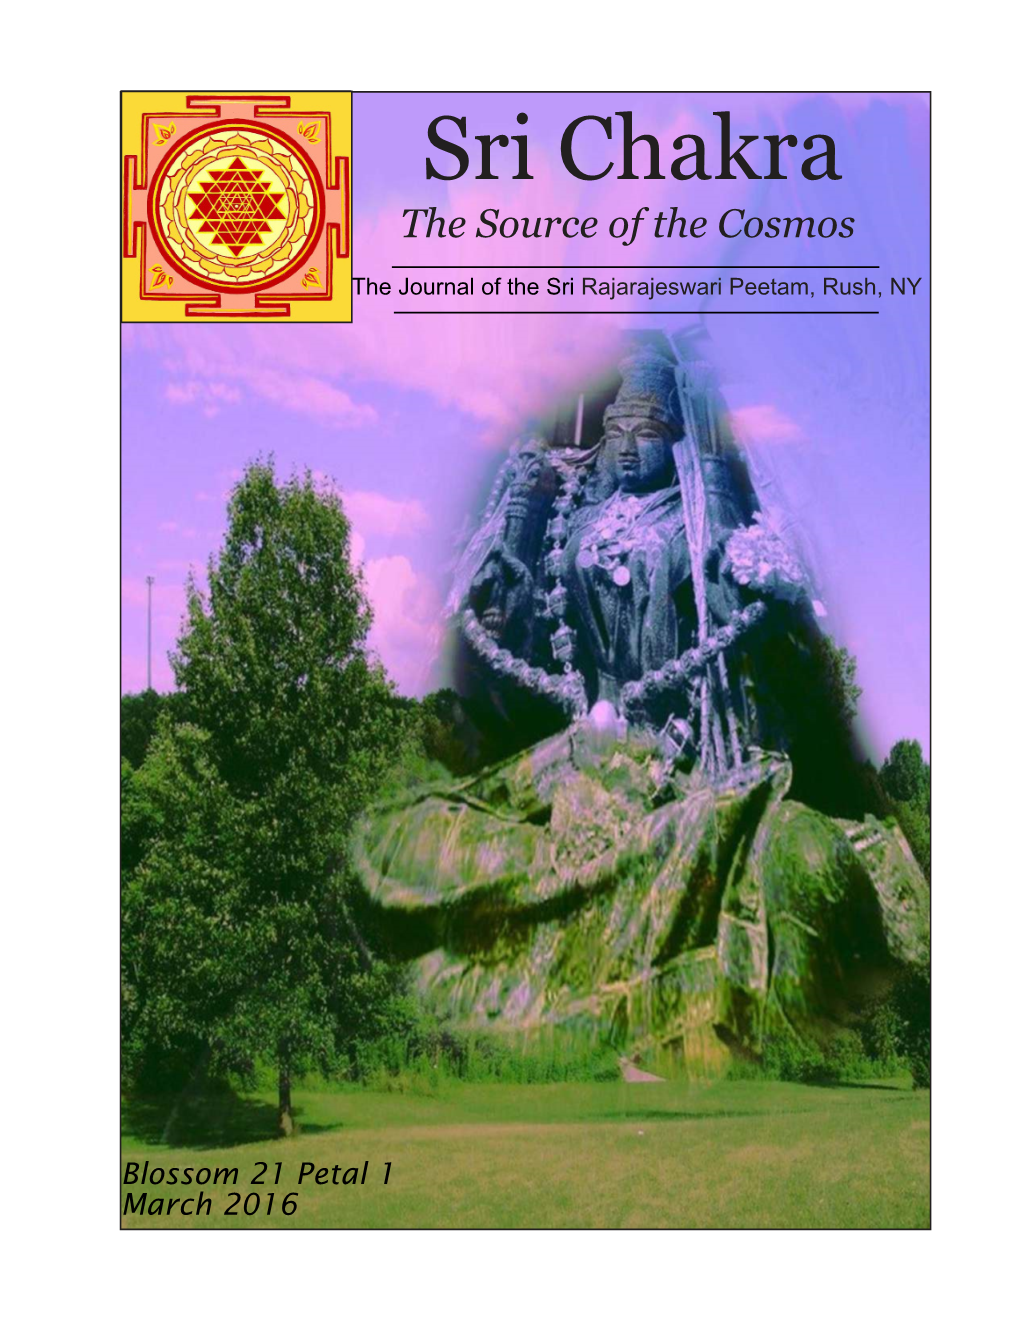 Sri Chakra the Source of the Cosmos